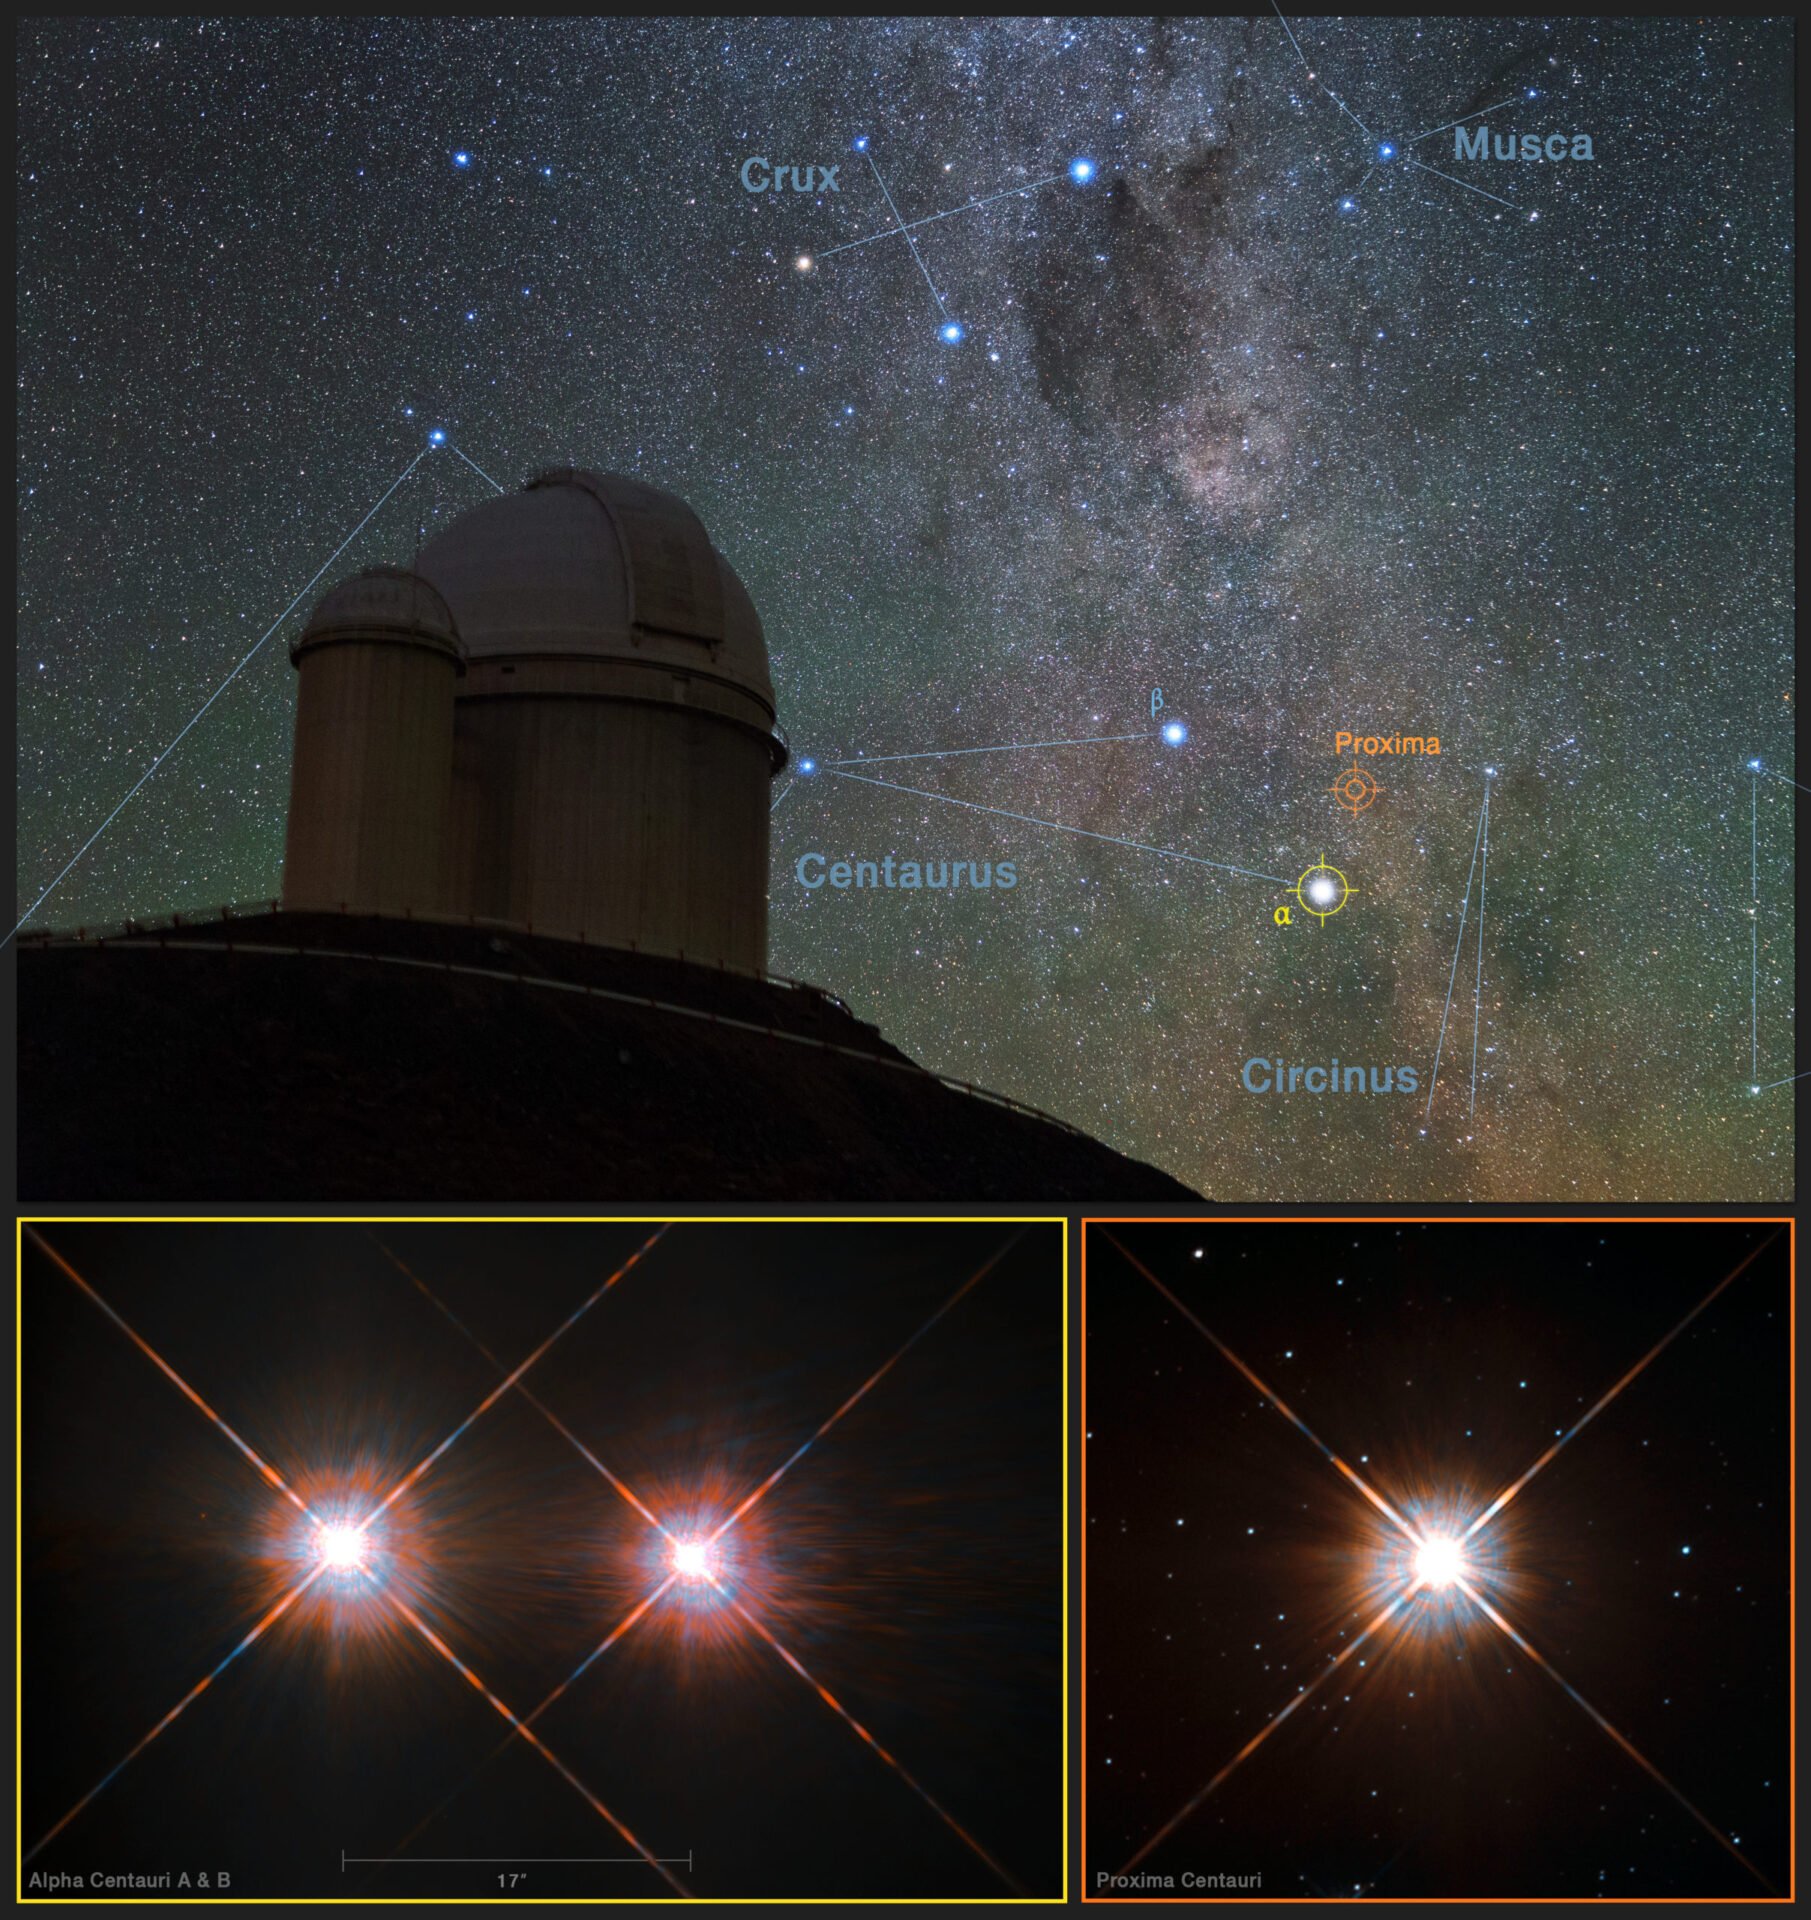 The location of Proxima Centauri in the southern skies